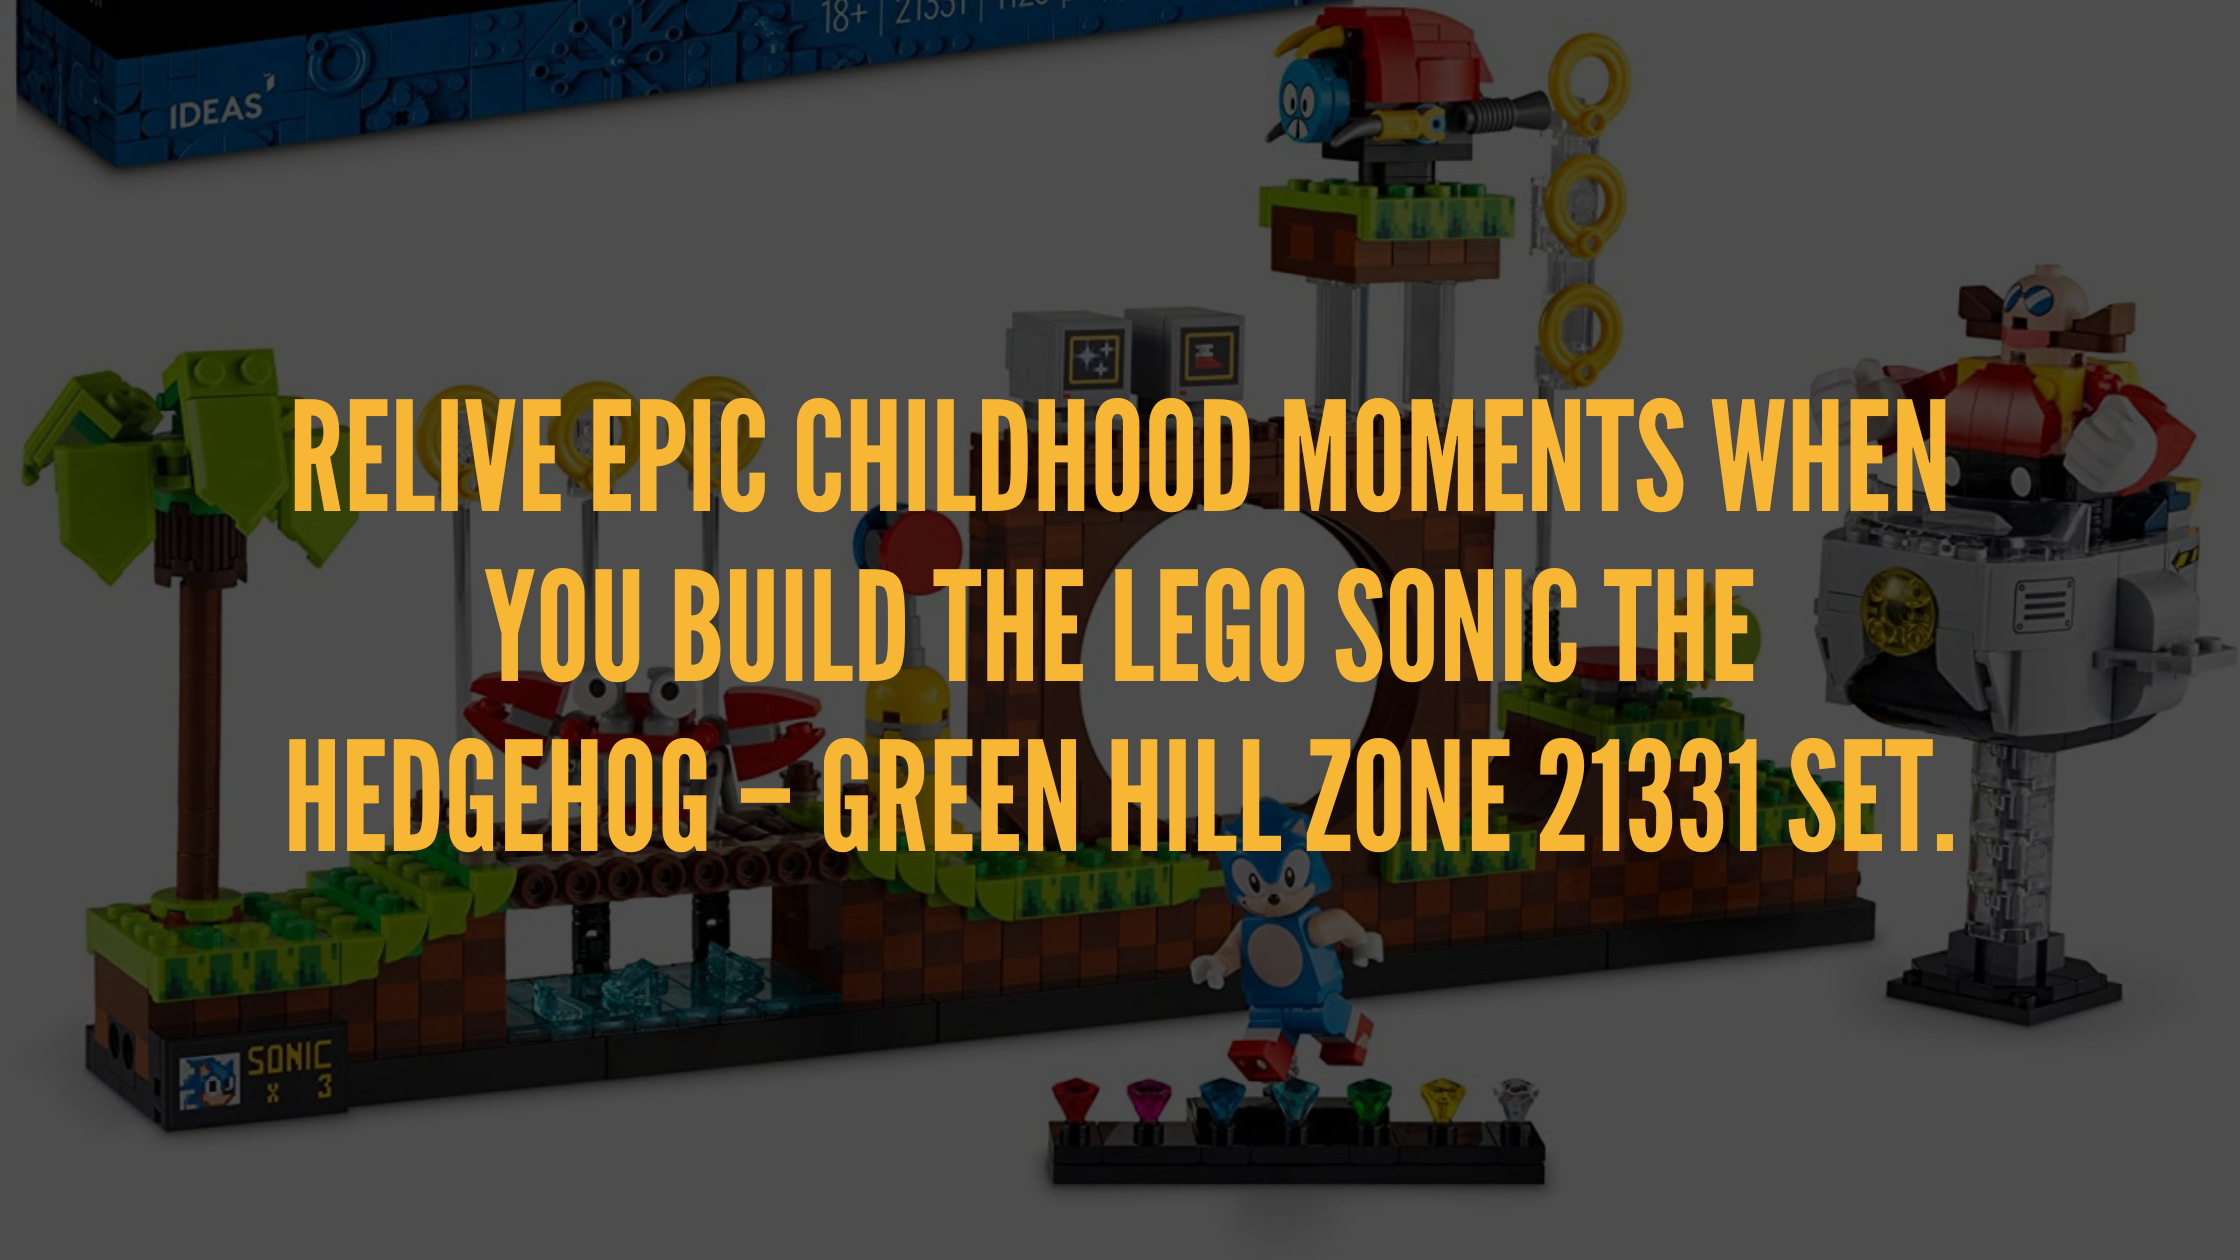 Sonic the Hedgehog – Green Hill Zone - 21331